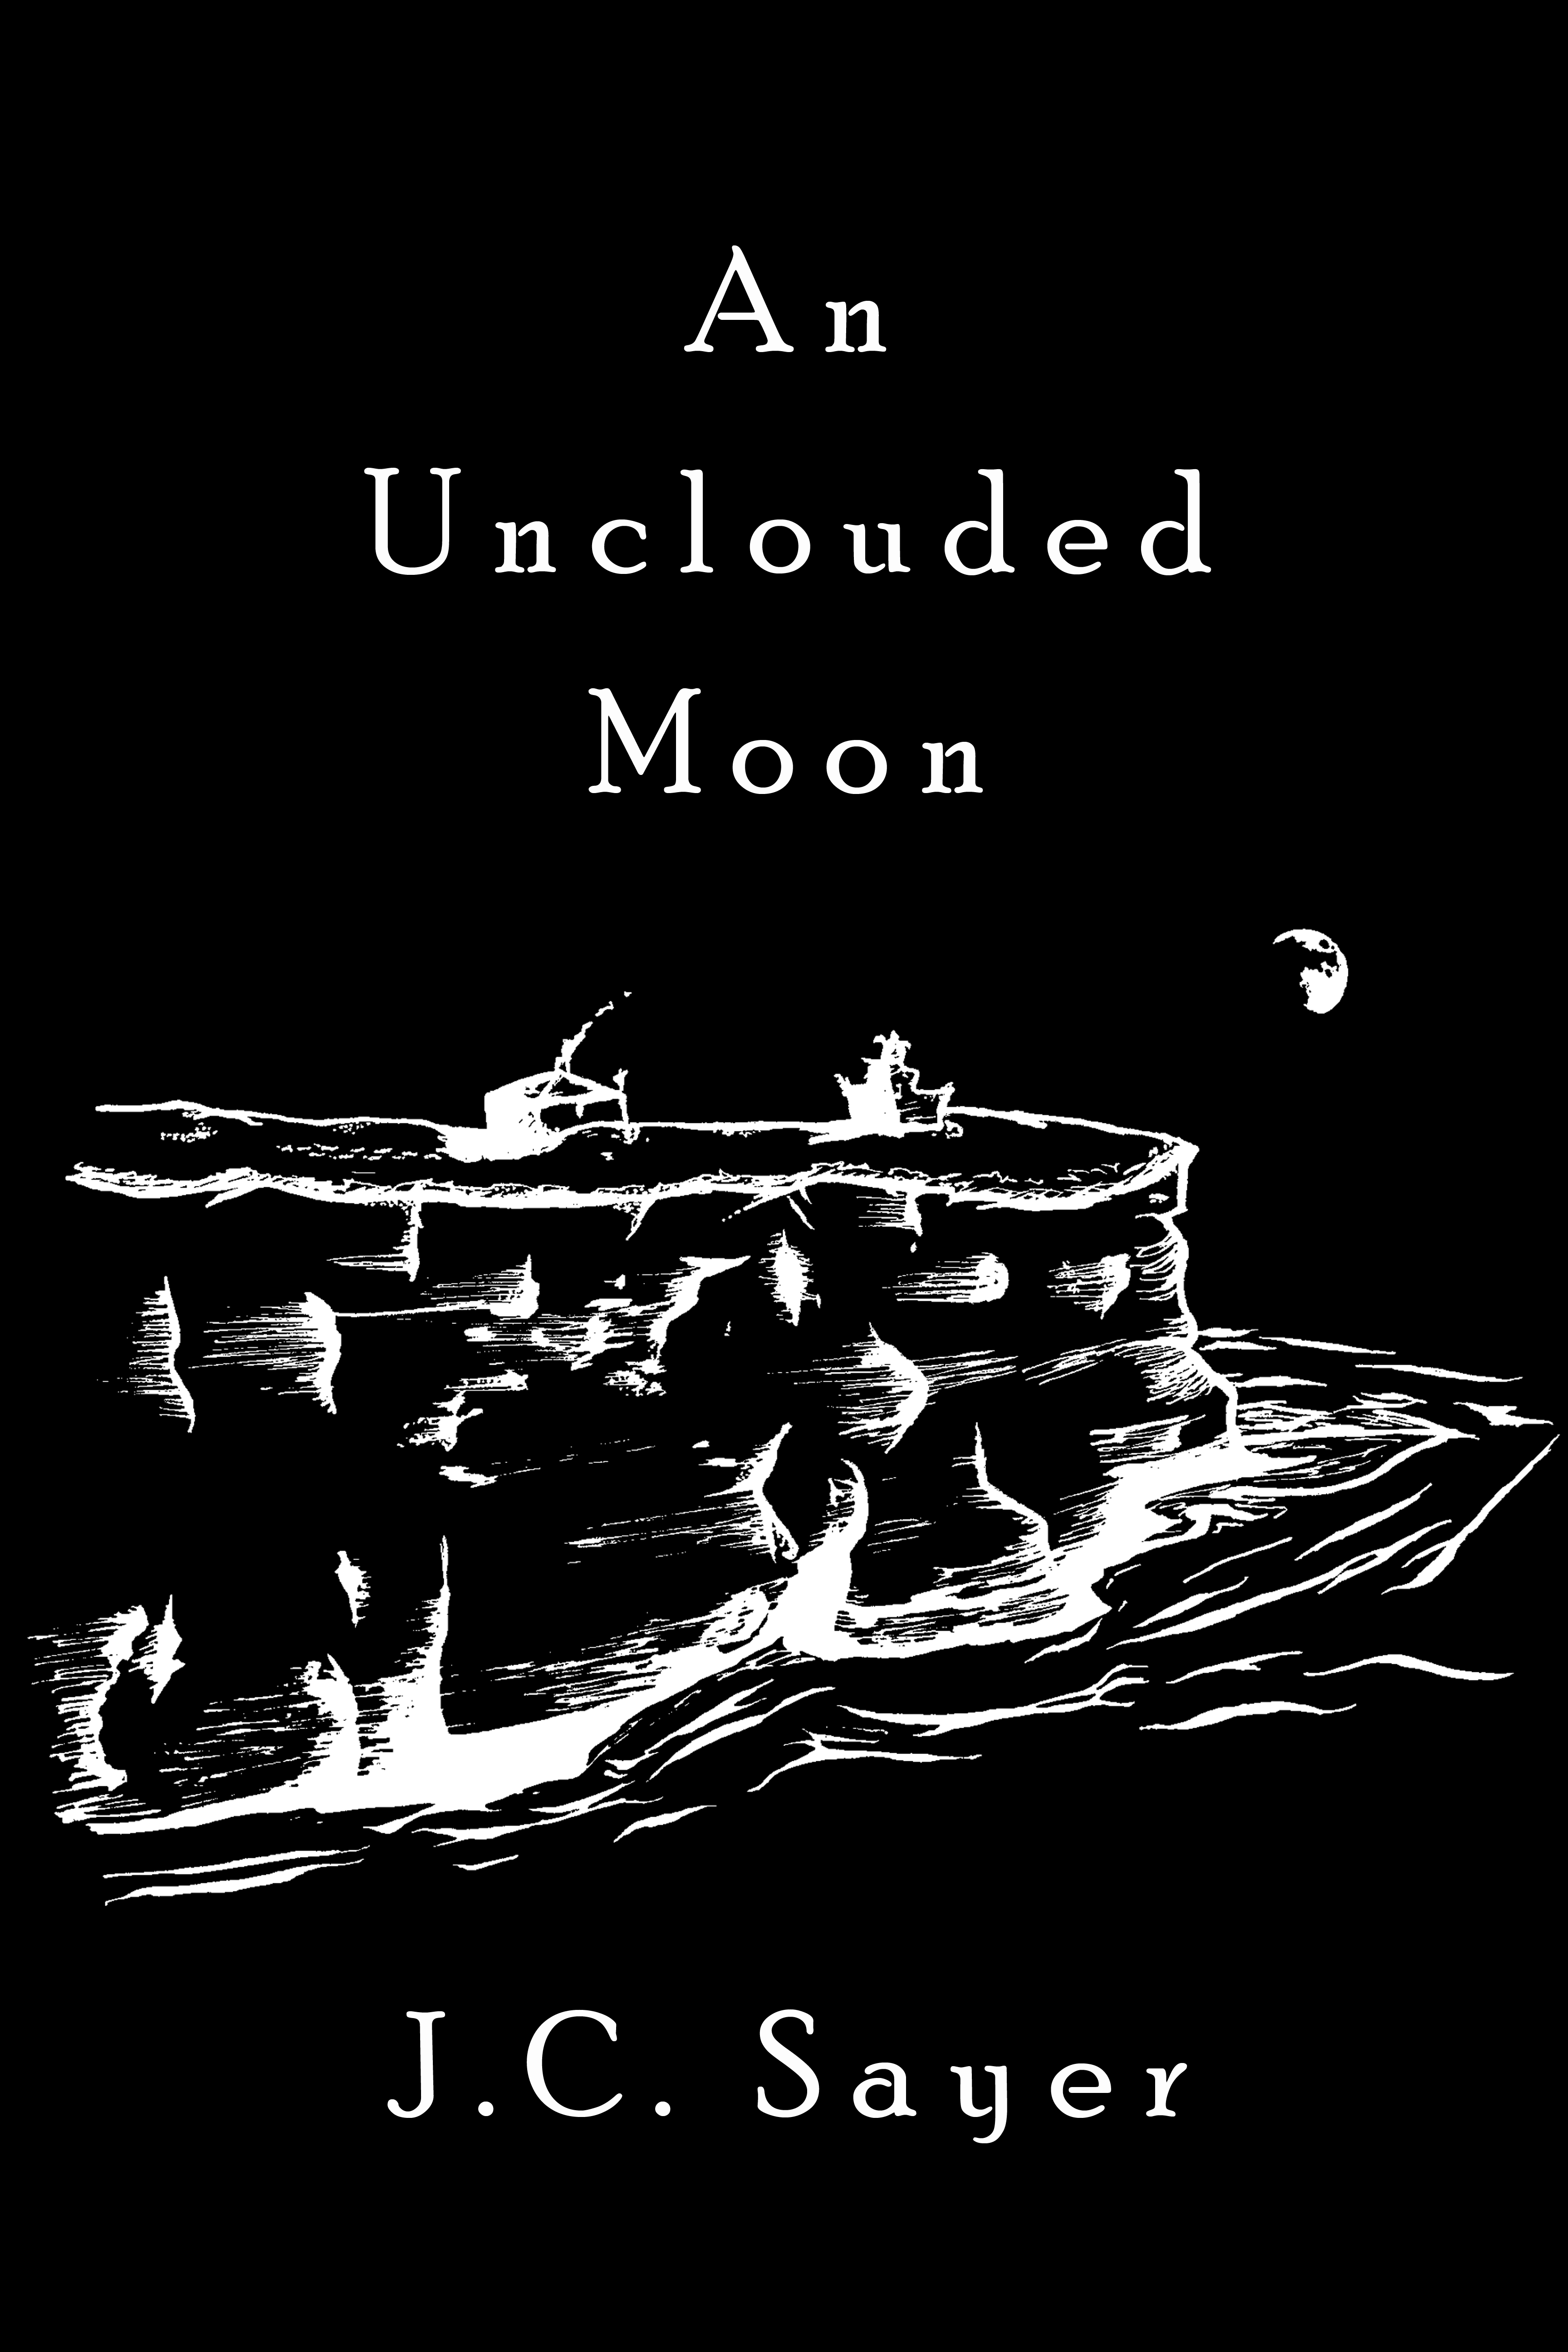 An Unclouded Moon